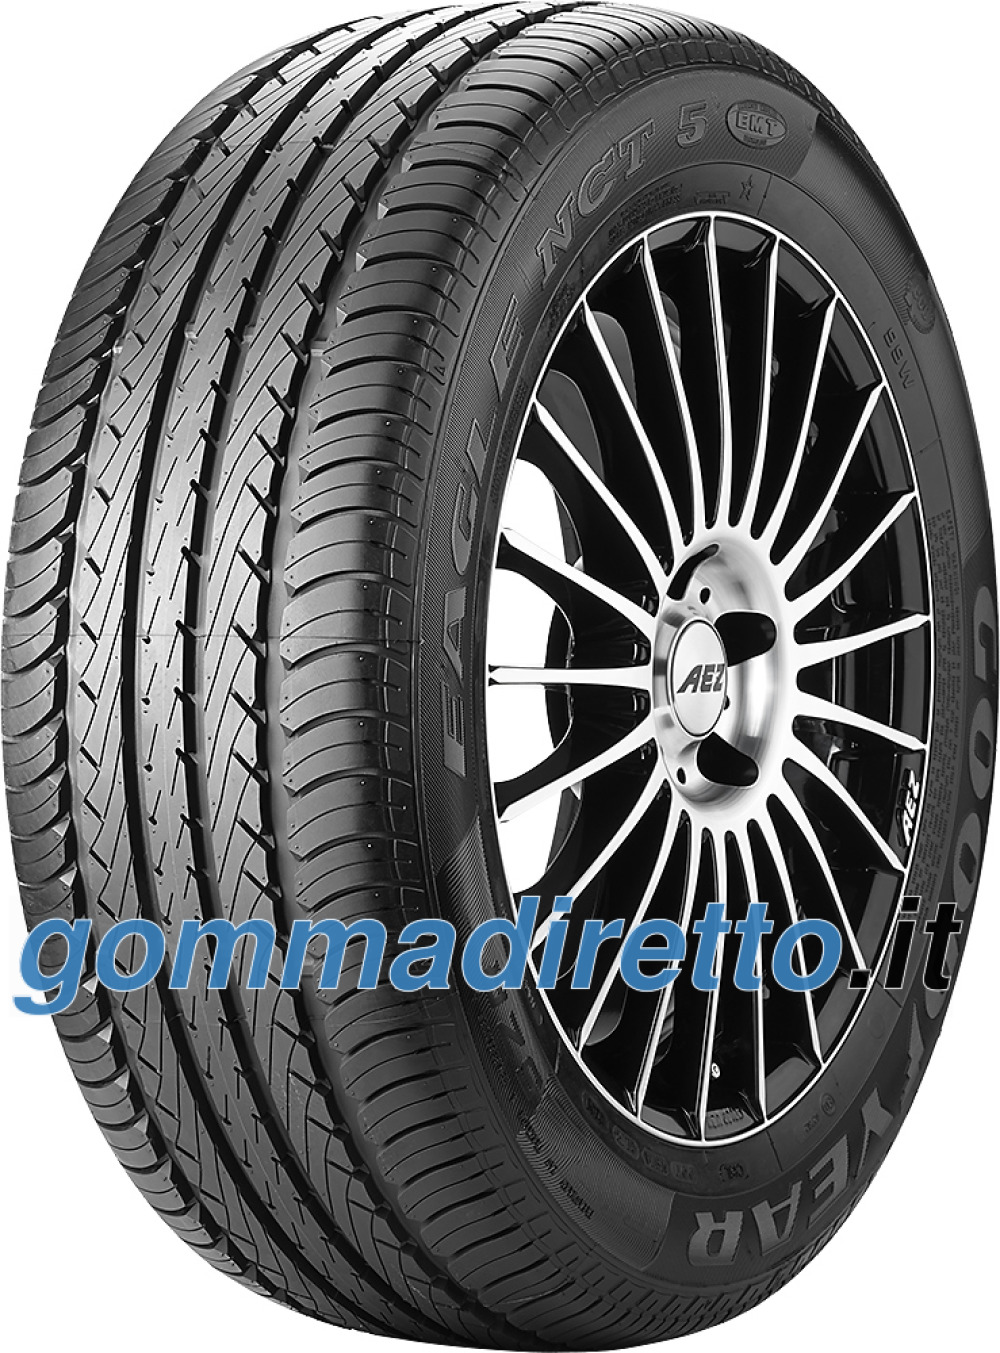 Image of Goodyear Eagle NCT 5 EMT ( 255/50 R21 106W *, runflat )